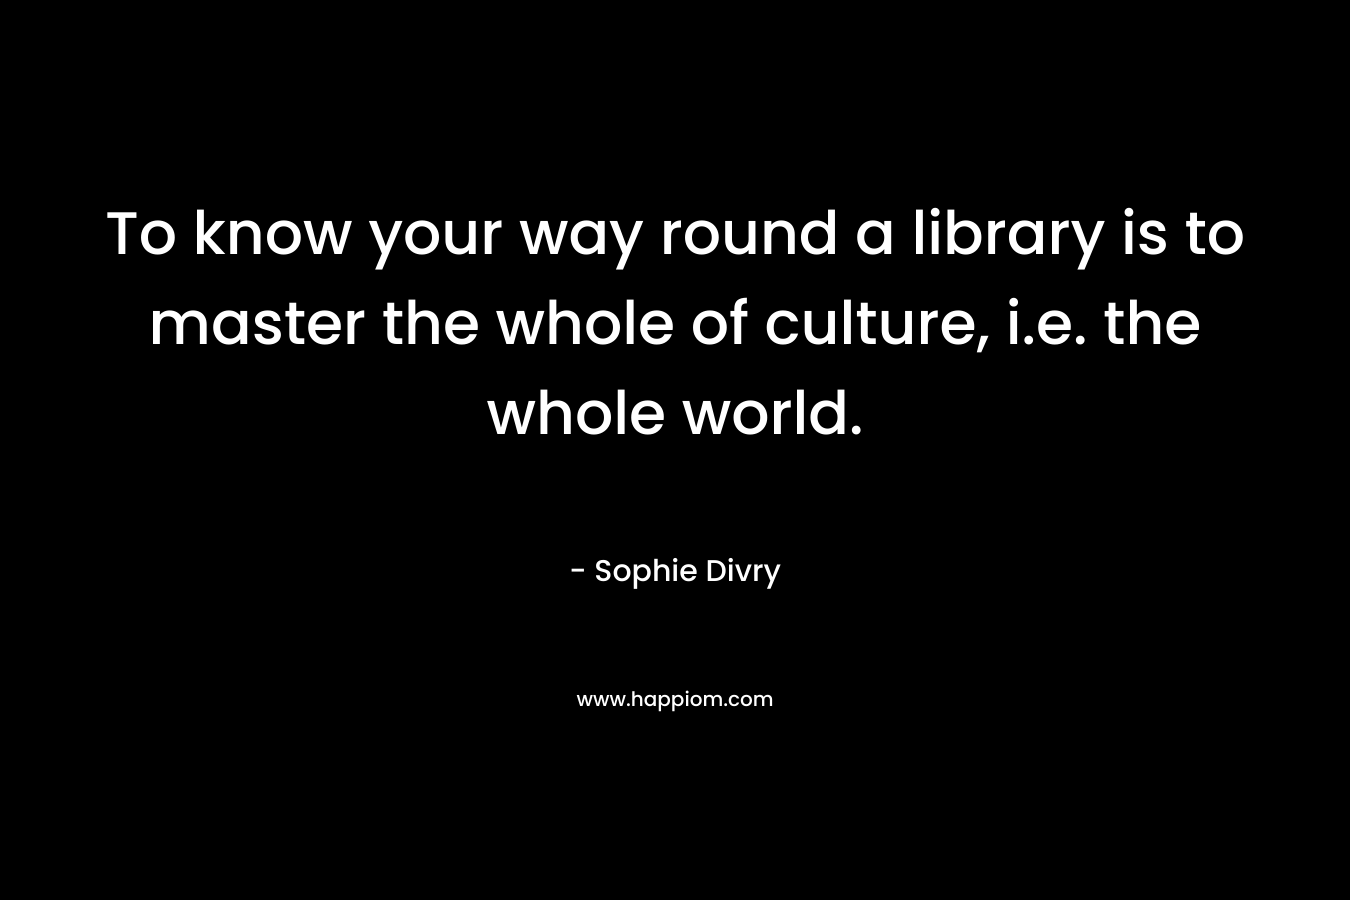 To know your way round a library is to master the whole of culture, i.e. the whole world.